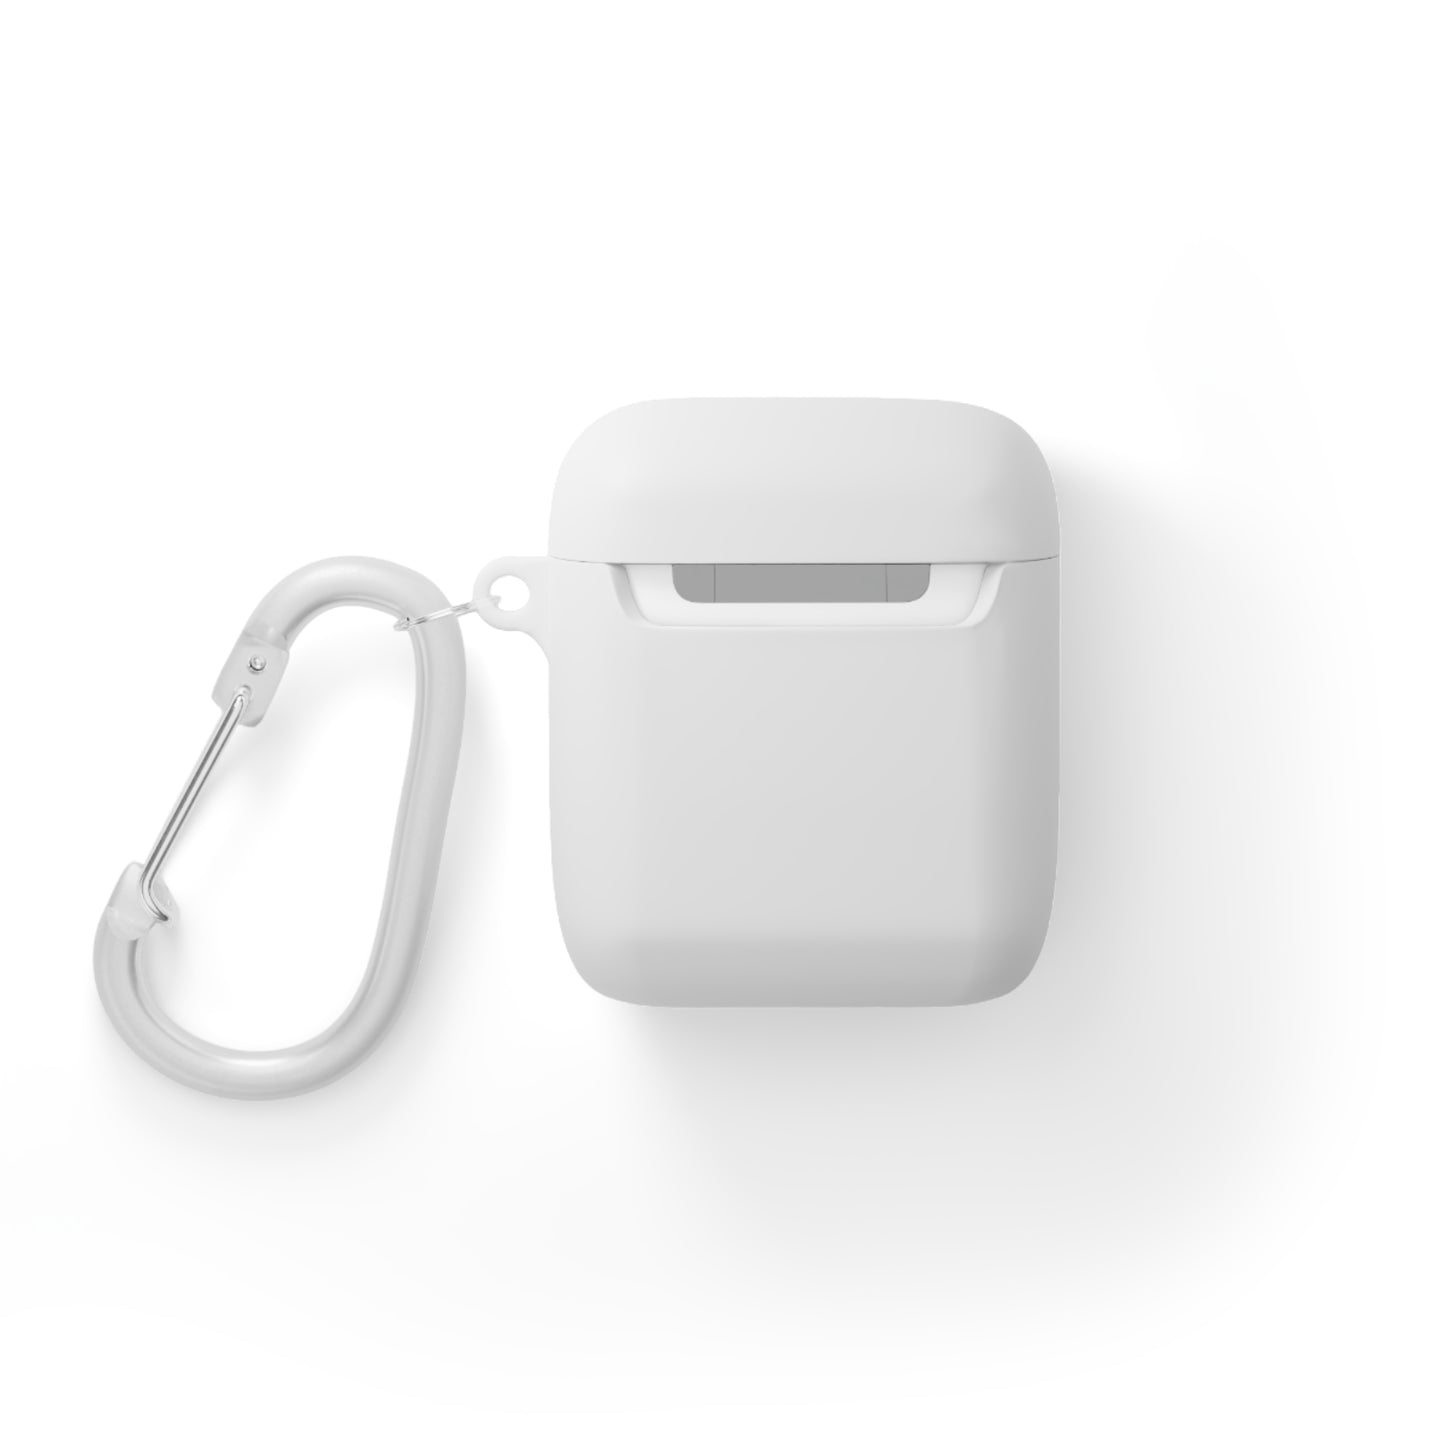 White - AirPods and AirPods Pro Case Cover